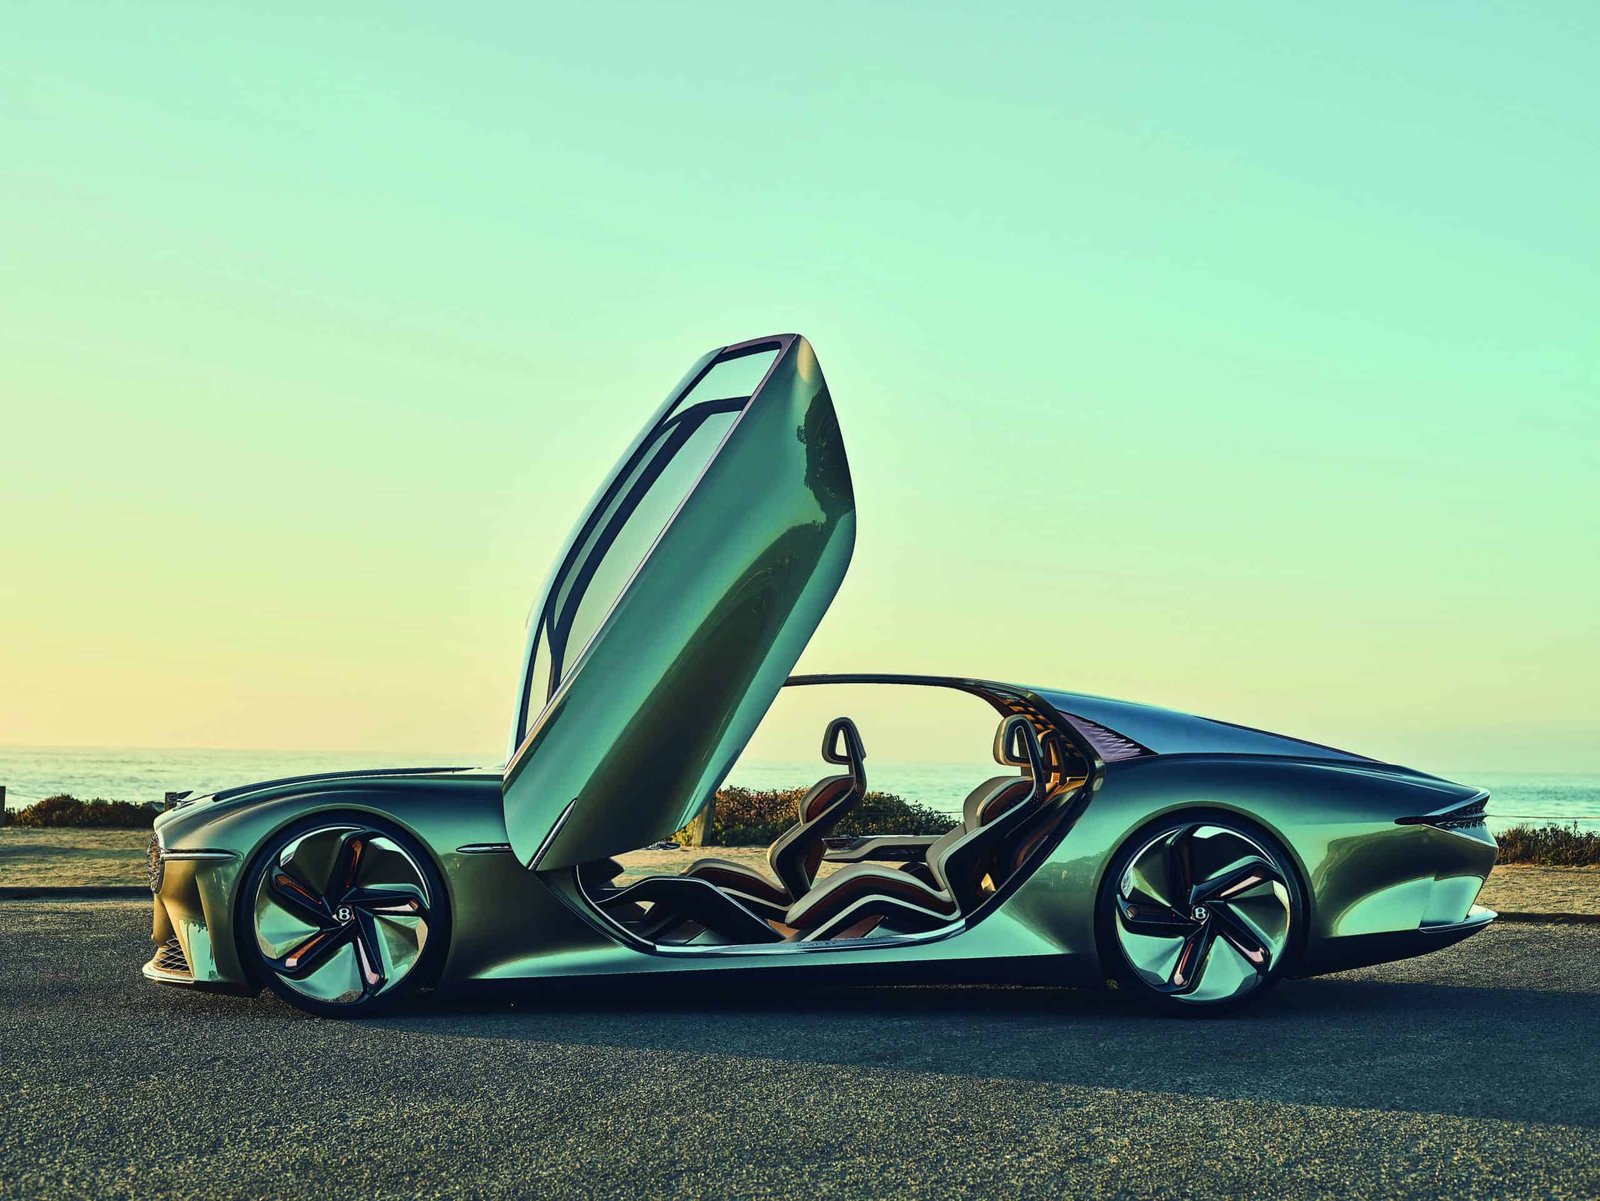 Mercedes-benz concept car with open doors, showcasing an innovative invention.